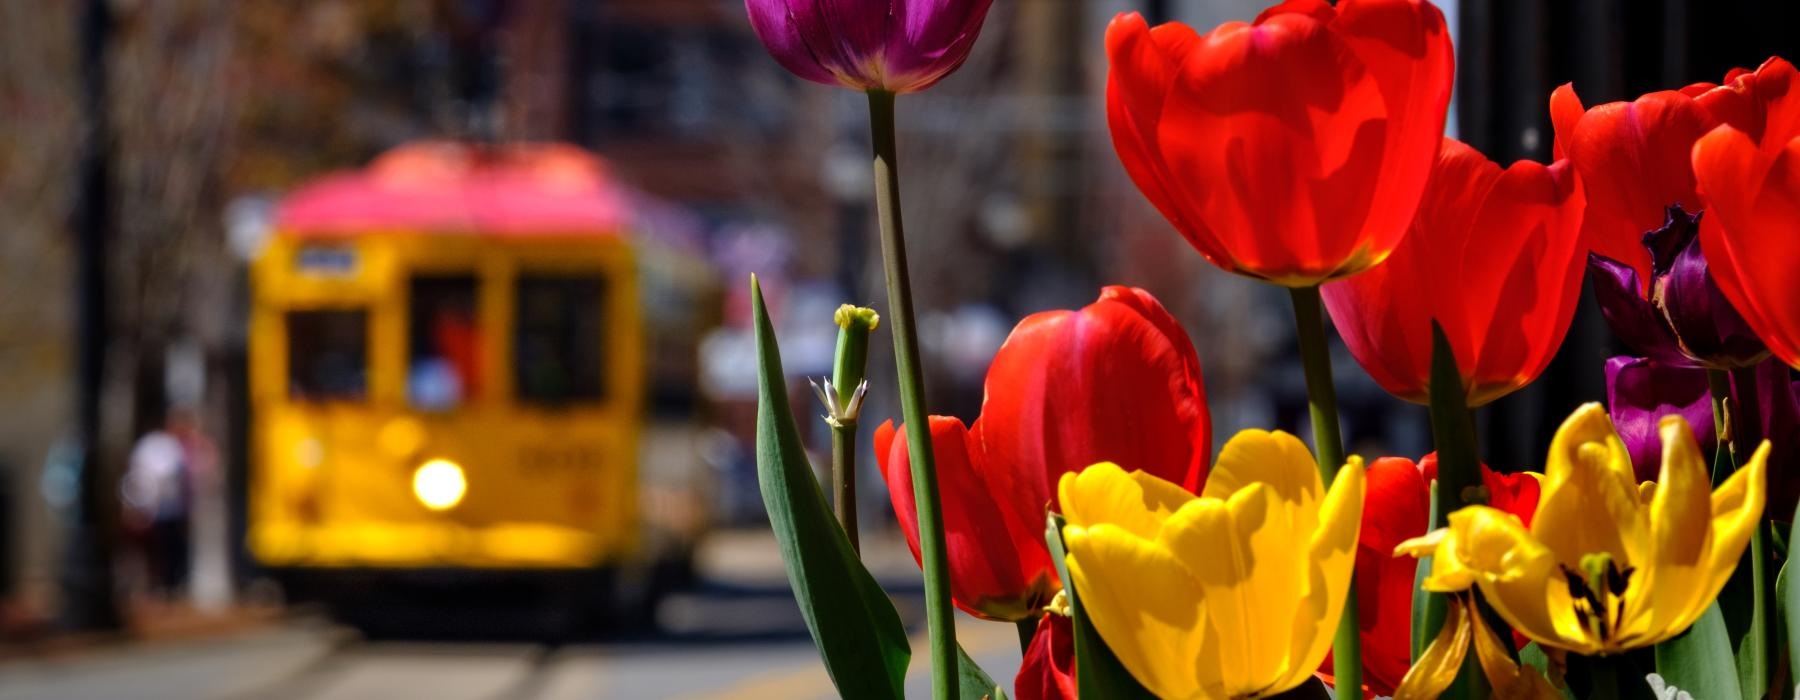 a group of colorful flowers with a train car in the background